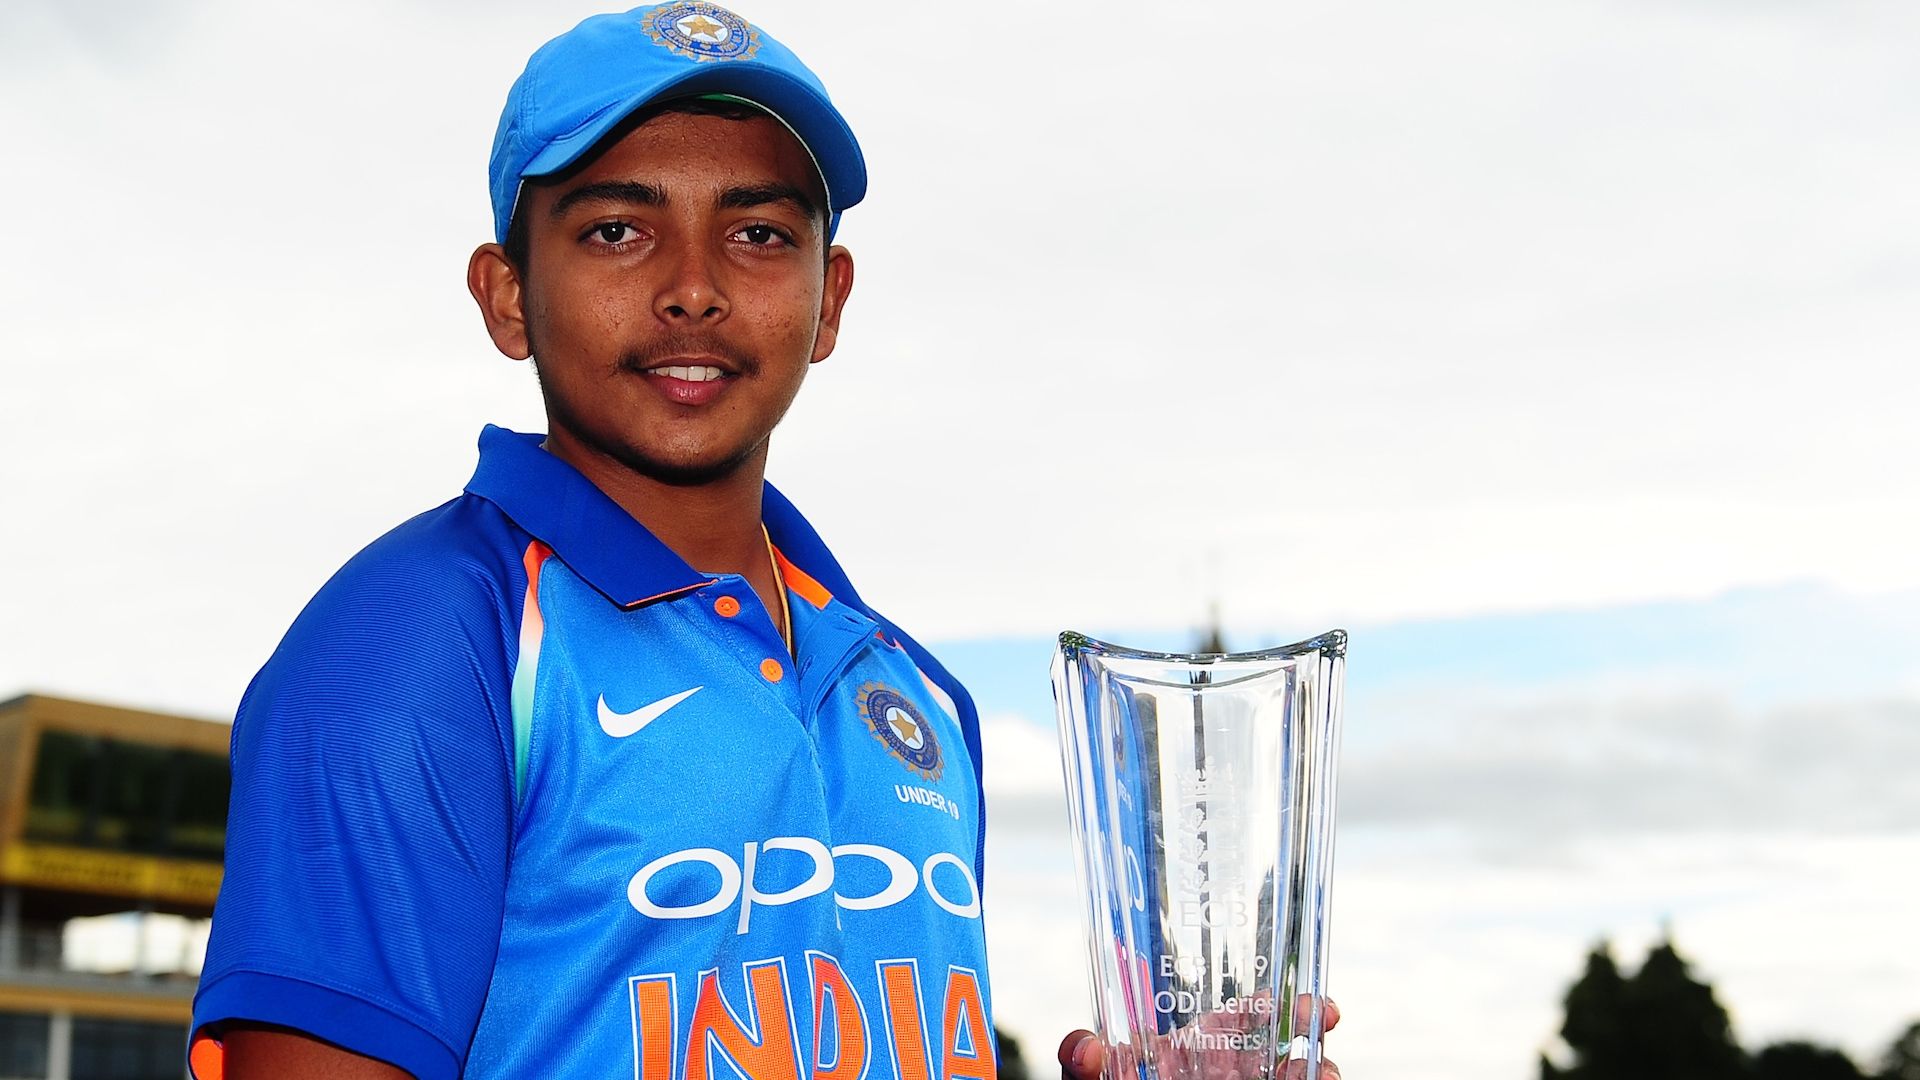 Prithvi Shaw Full Biography, Records, Height, Age, Wife, & More